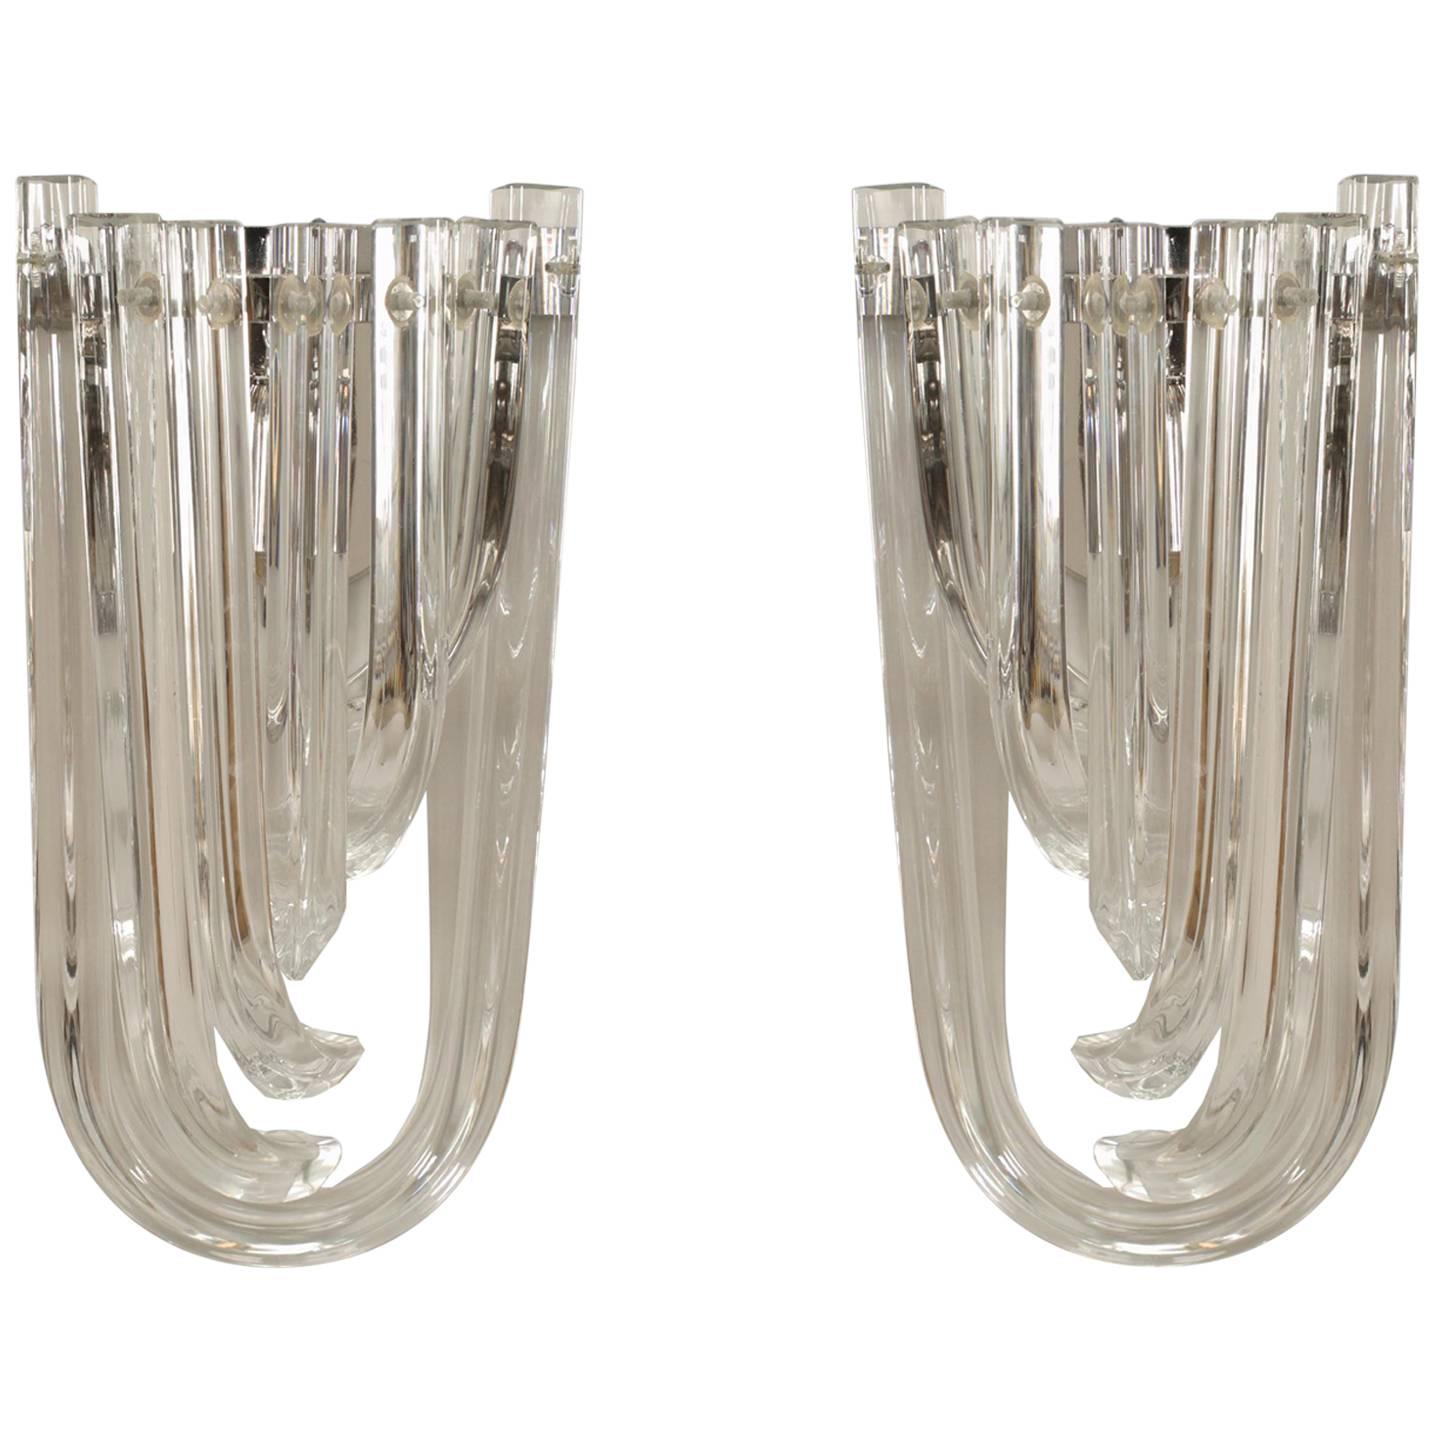 8 Italian Contemporary Glass Wall Sconces For Sale